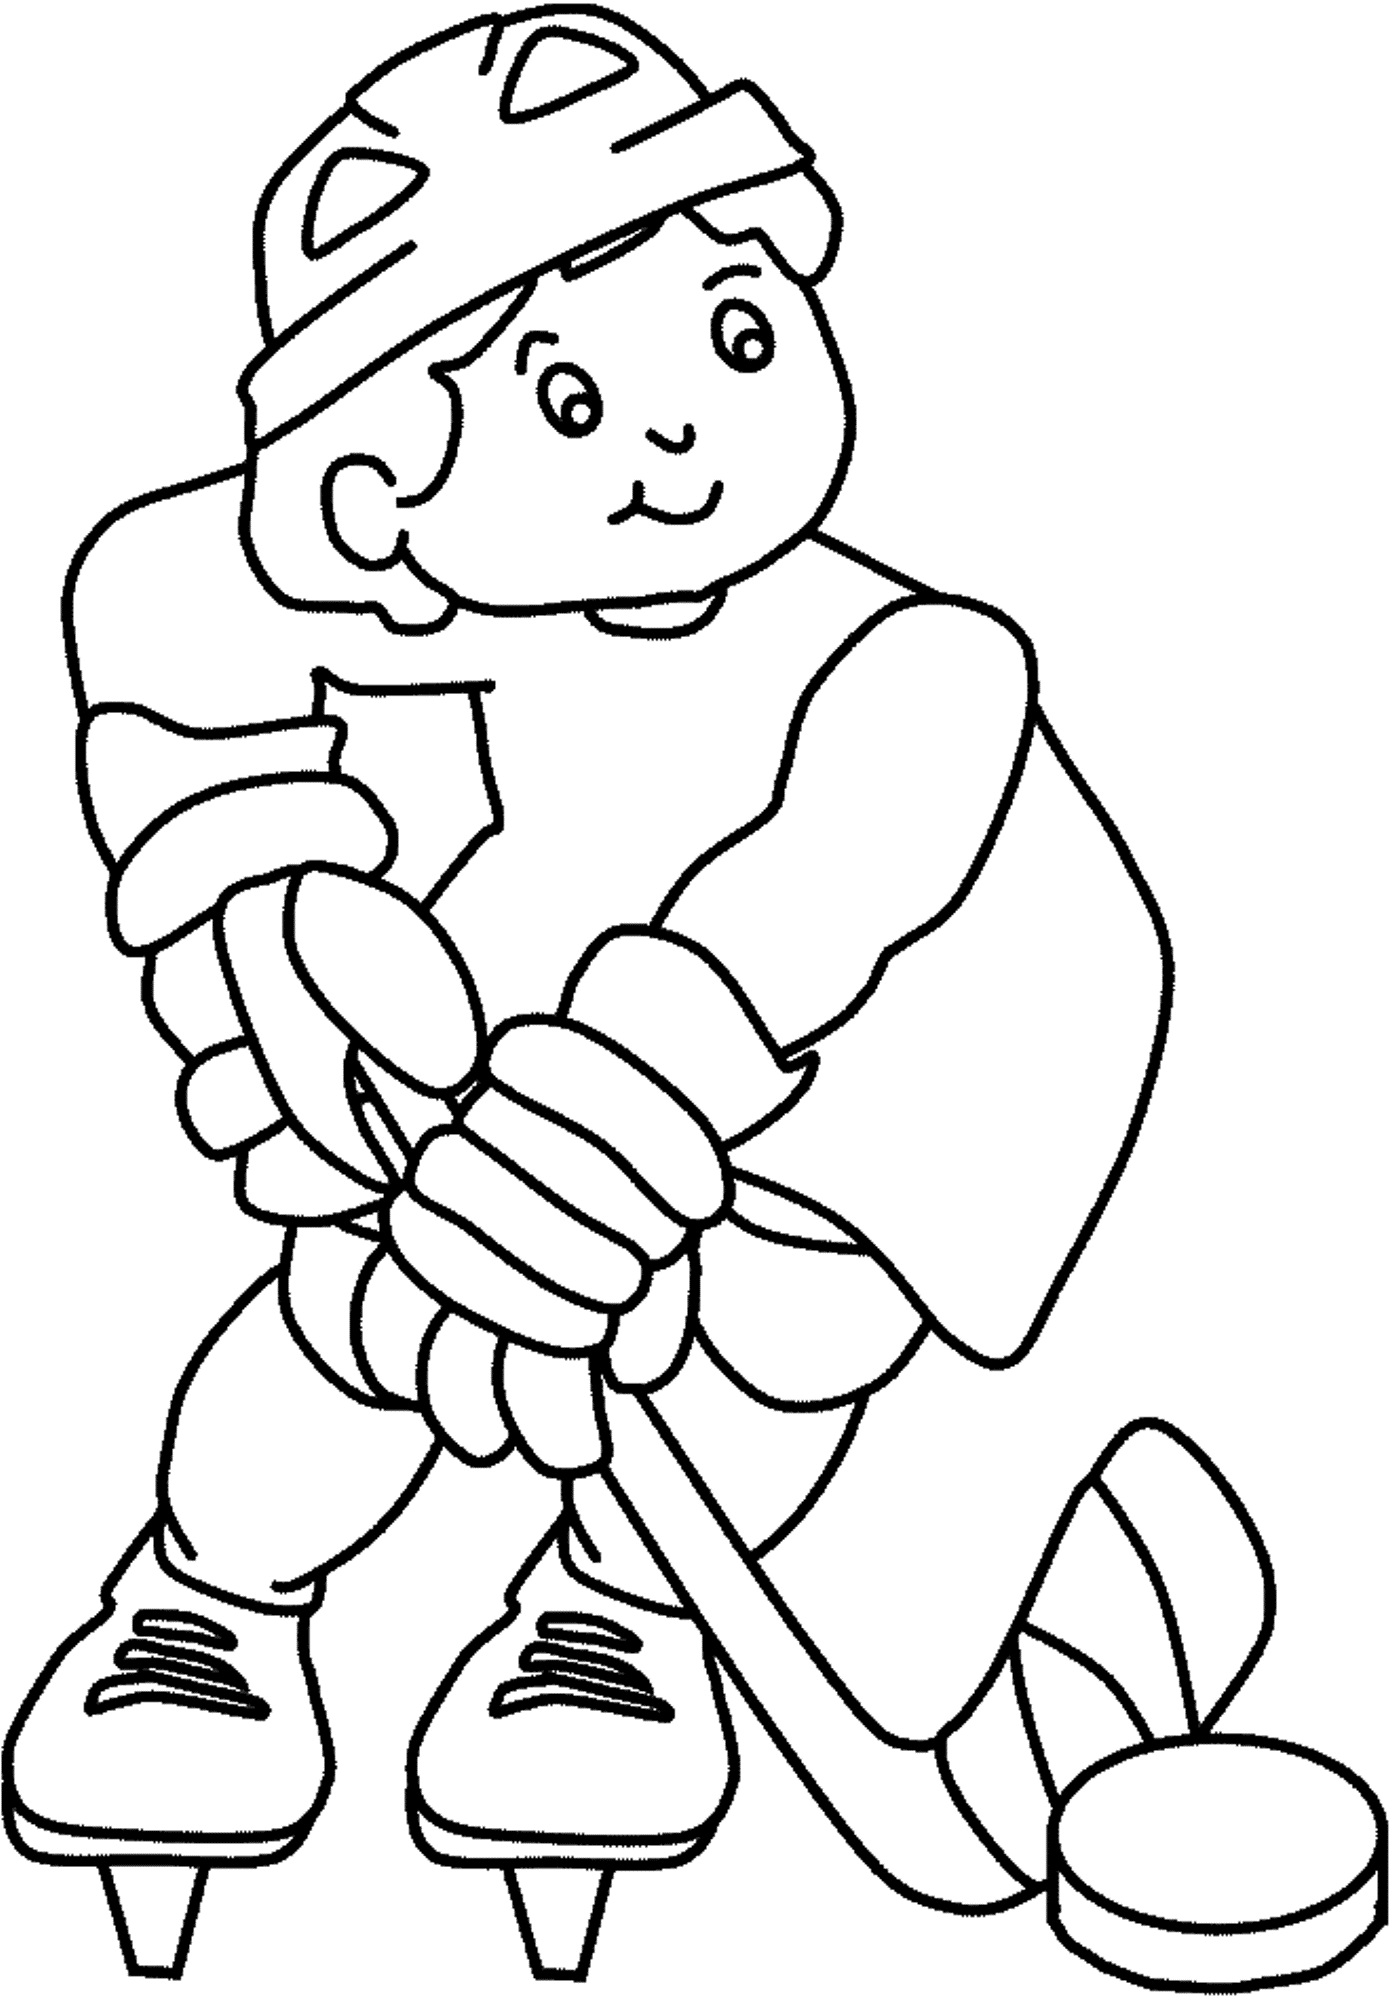 Printable Hockey Coloring Pages | ColoringMe.com